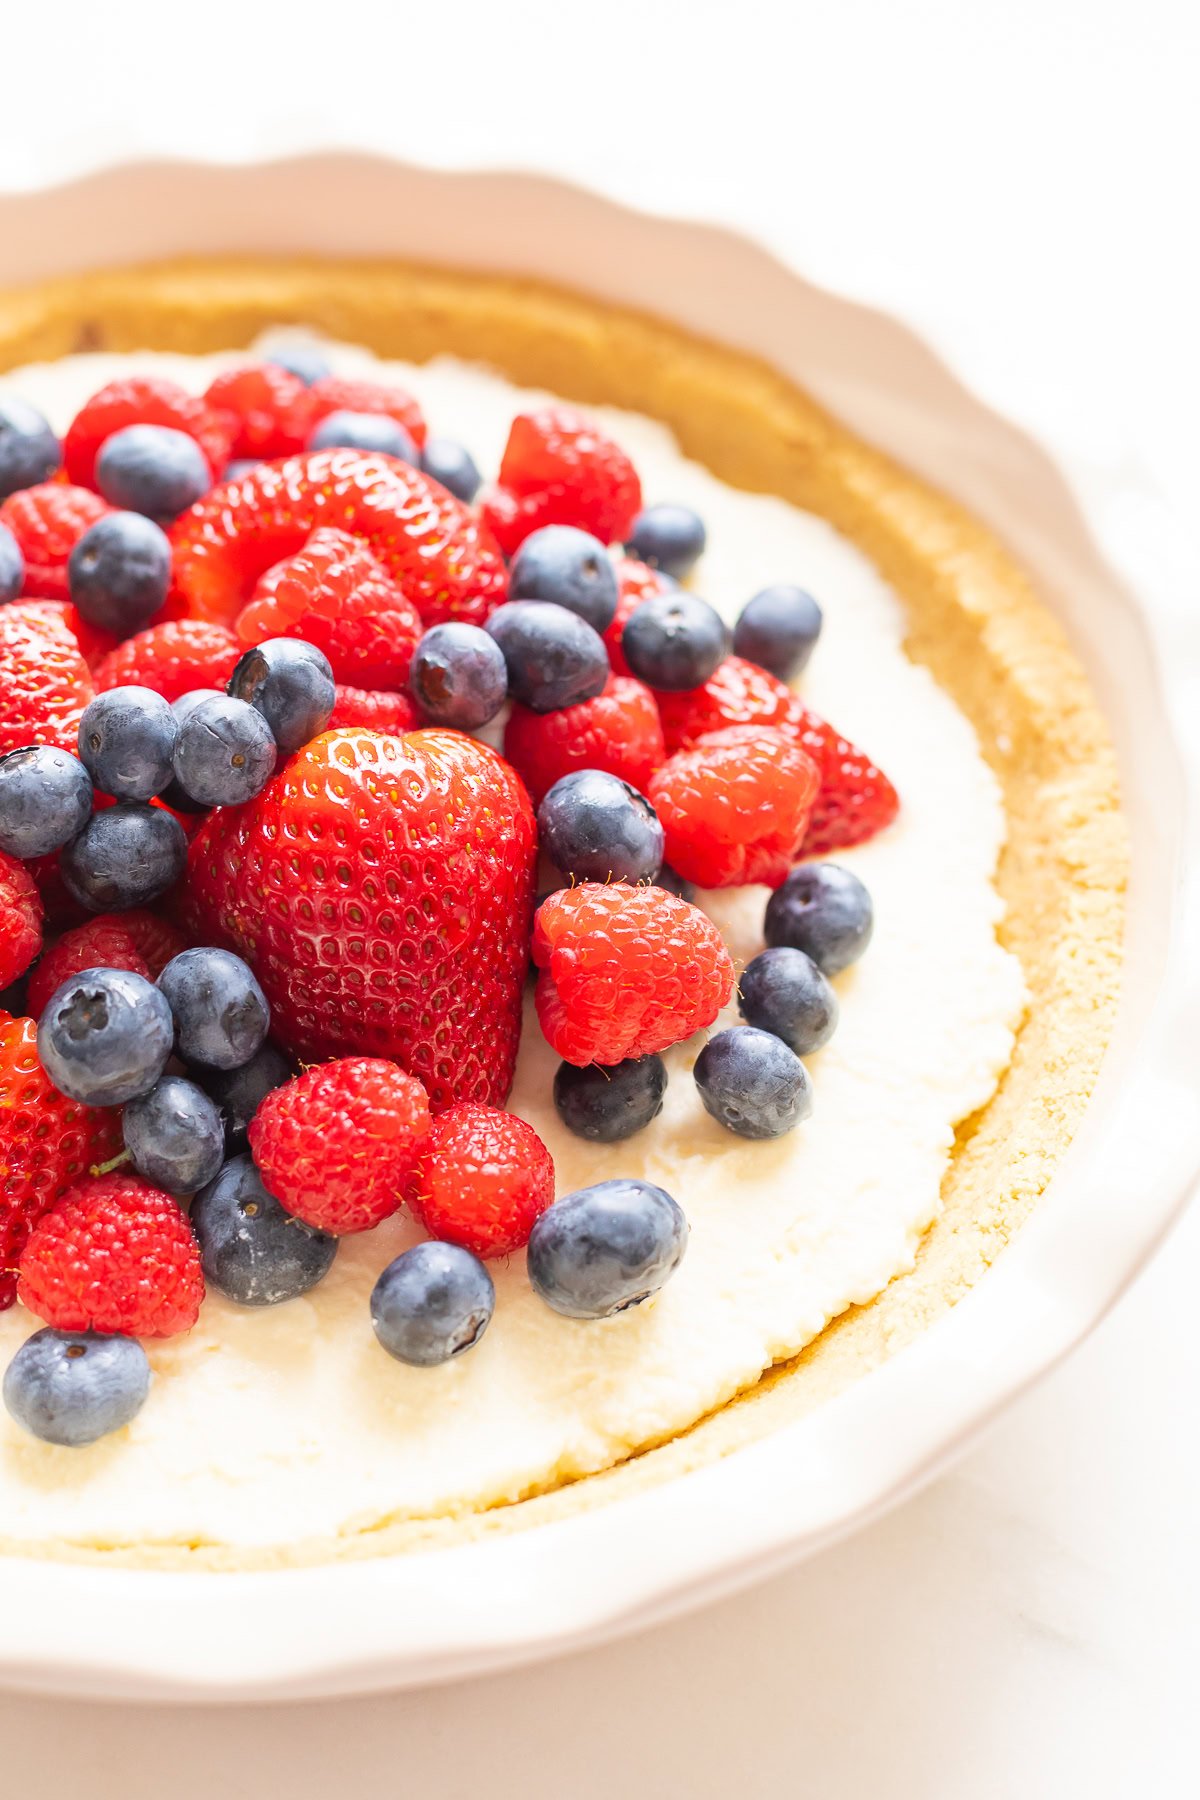 A close-up of a no bake lemon pie cheesecake topped with fresh strawberries, raspberries, and blueberries in a pie dish. The cheesecake has a graham cracker crust.